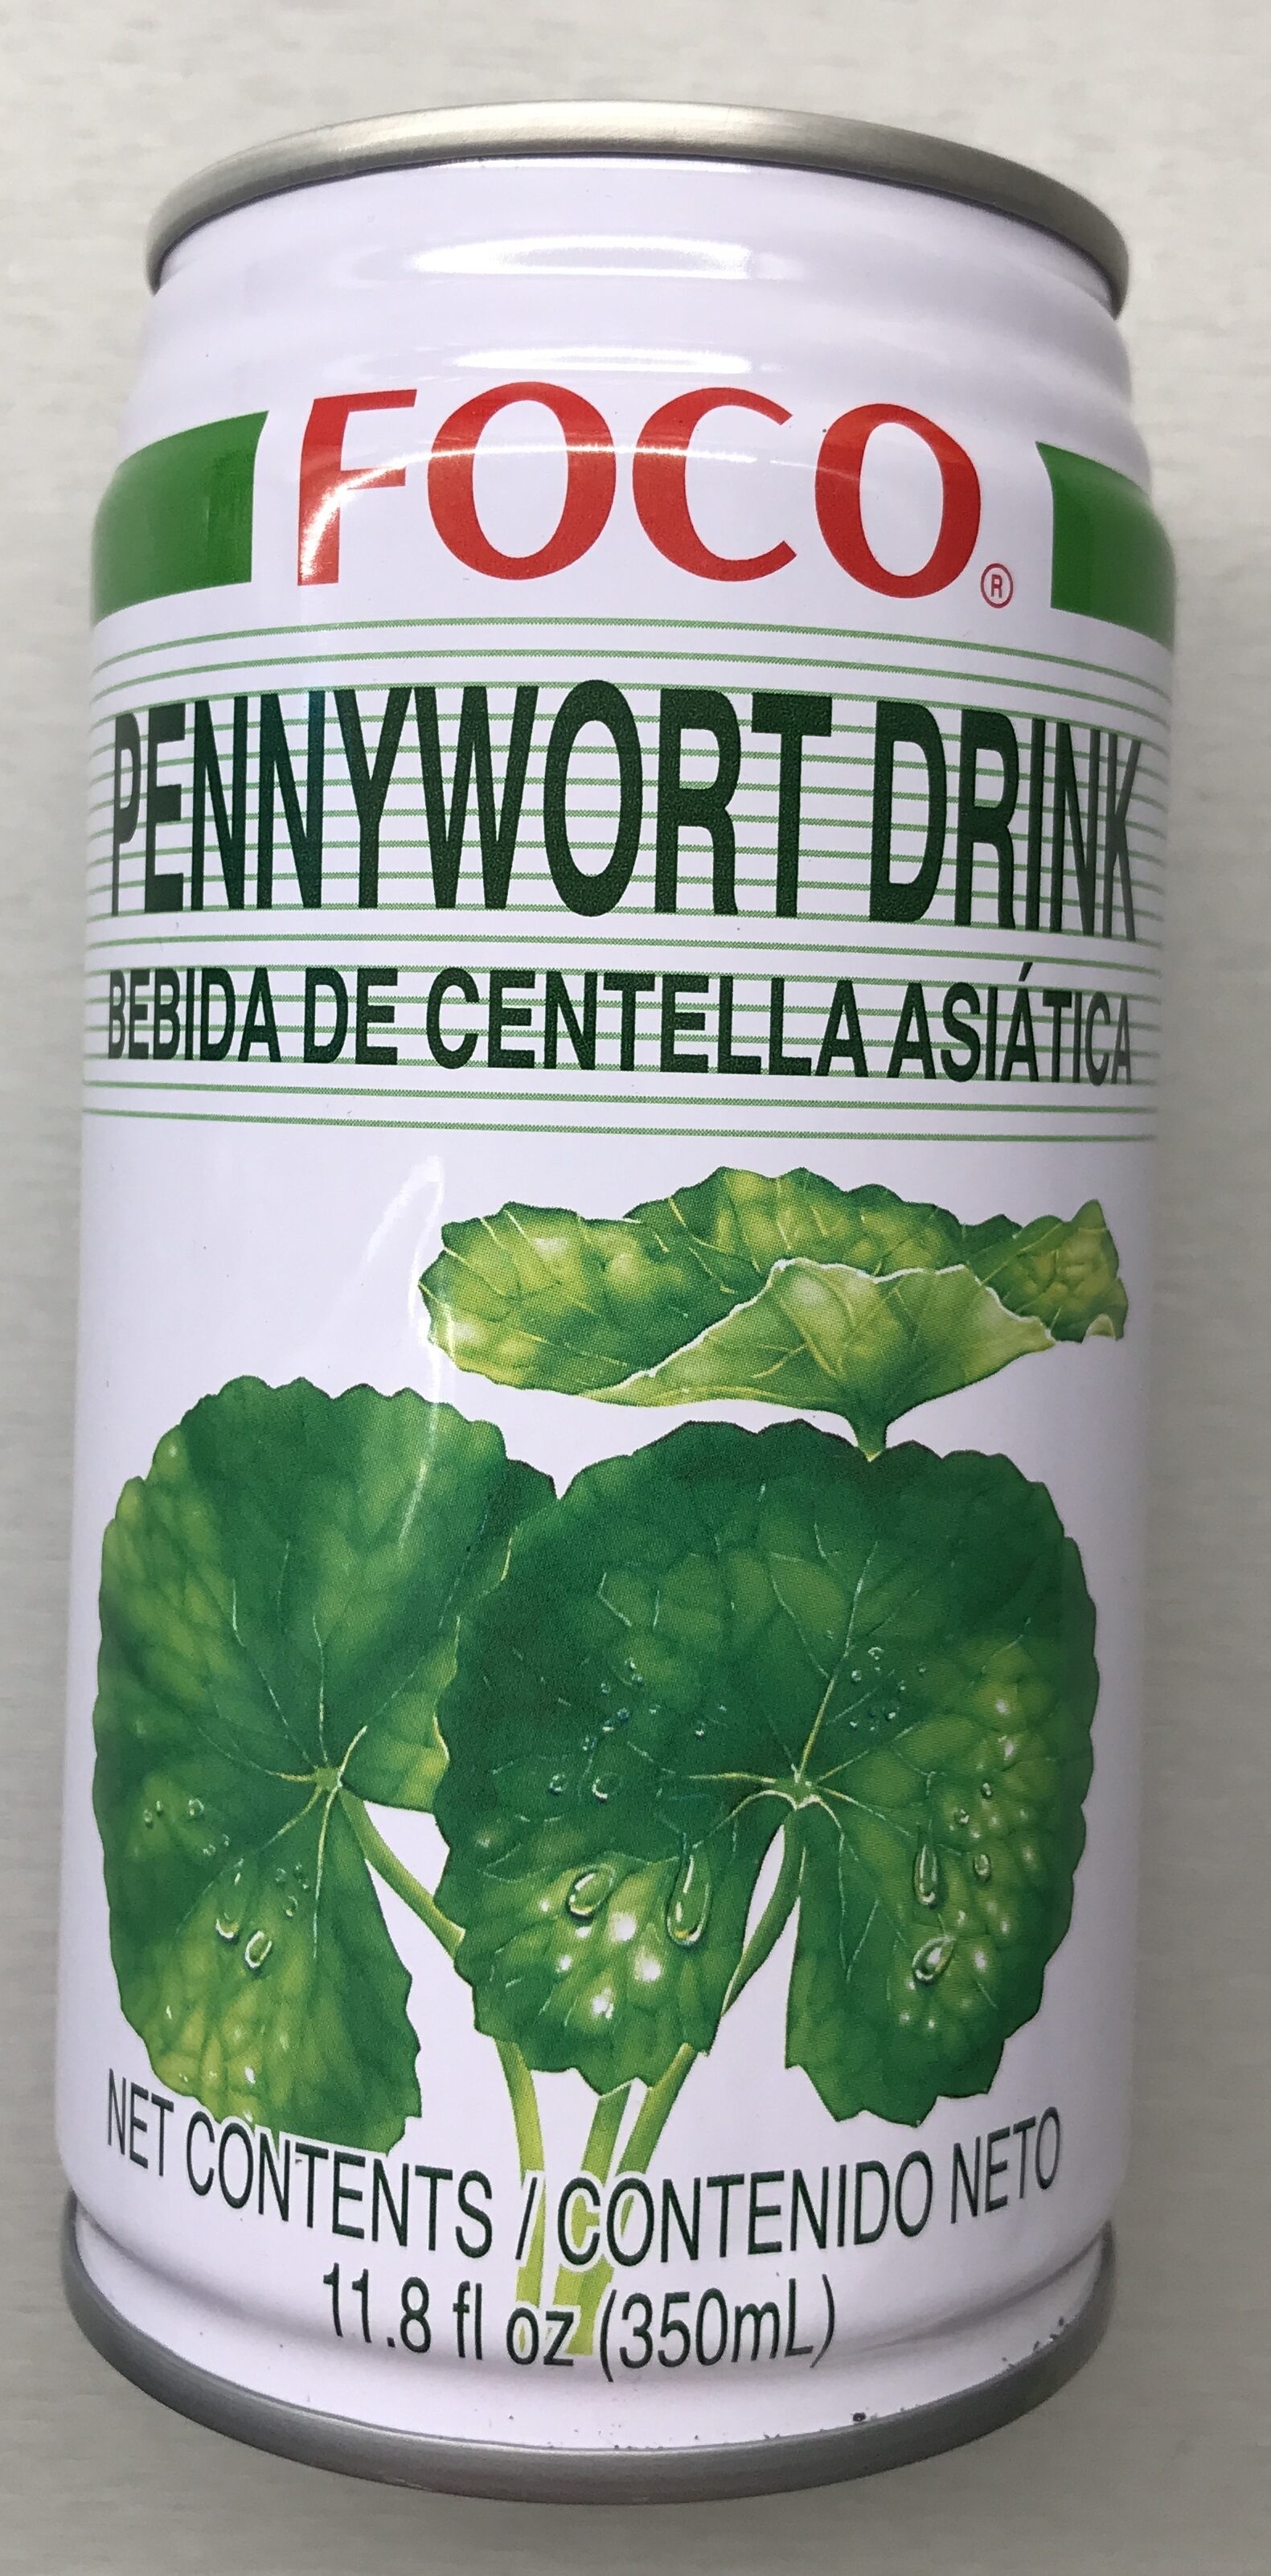 Pennywort Drink - Product